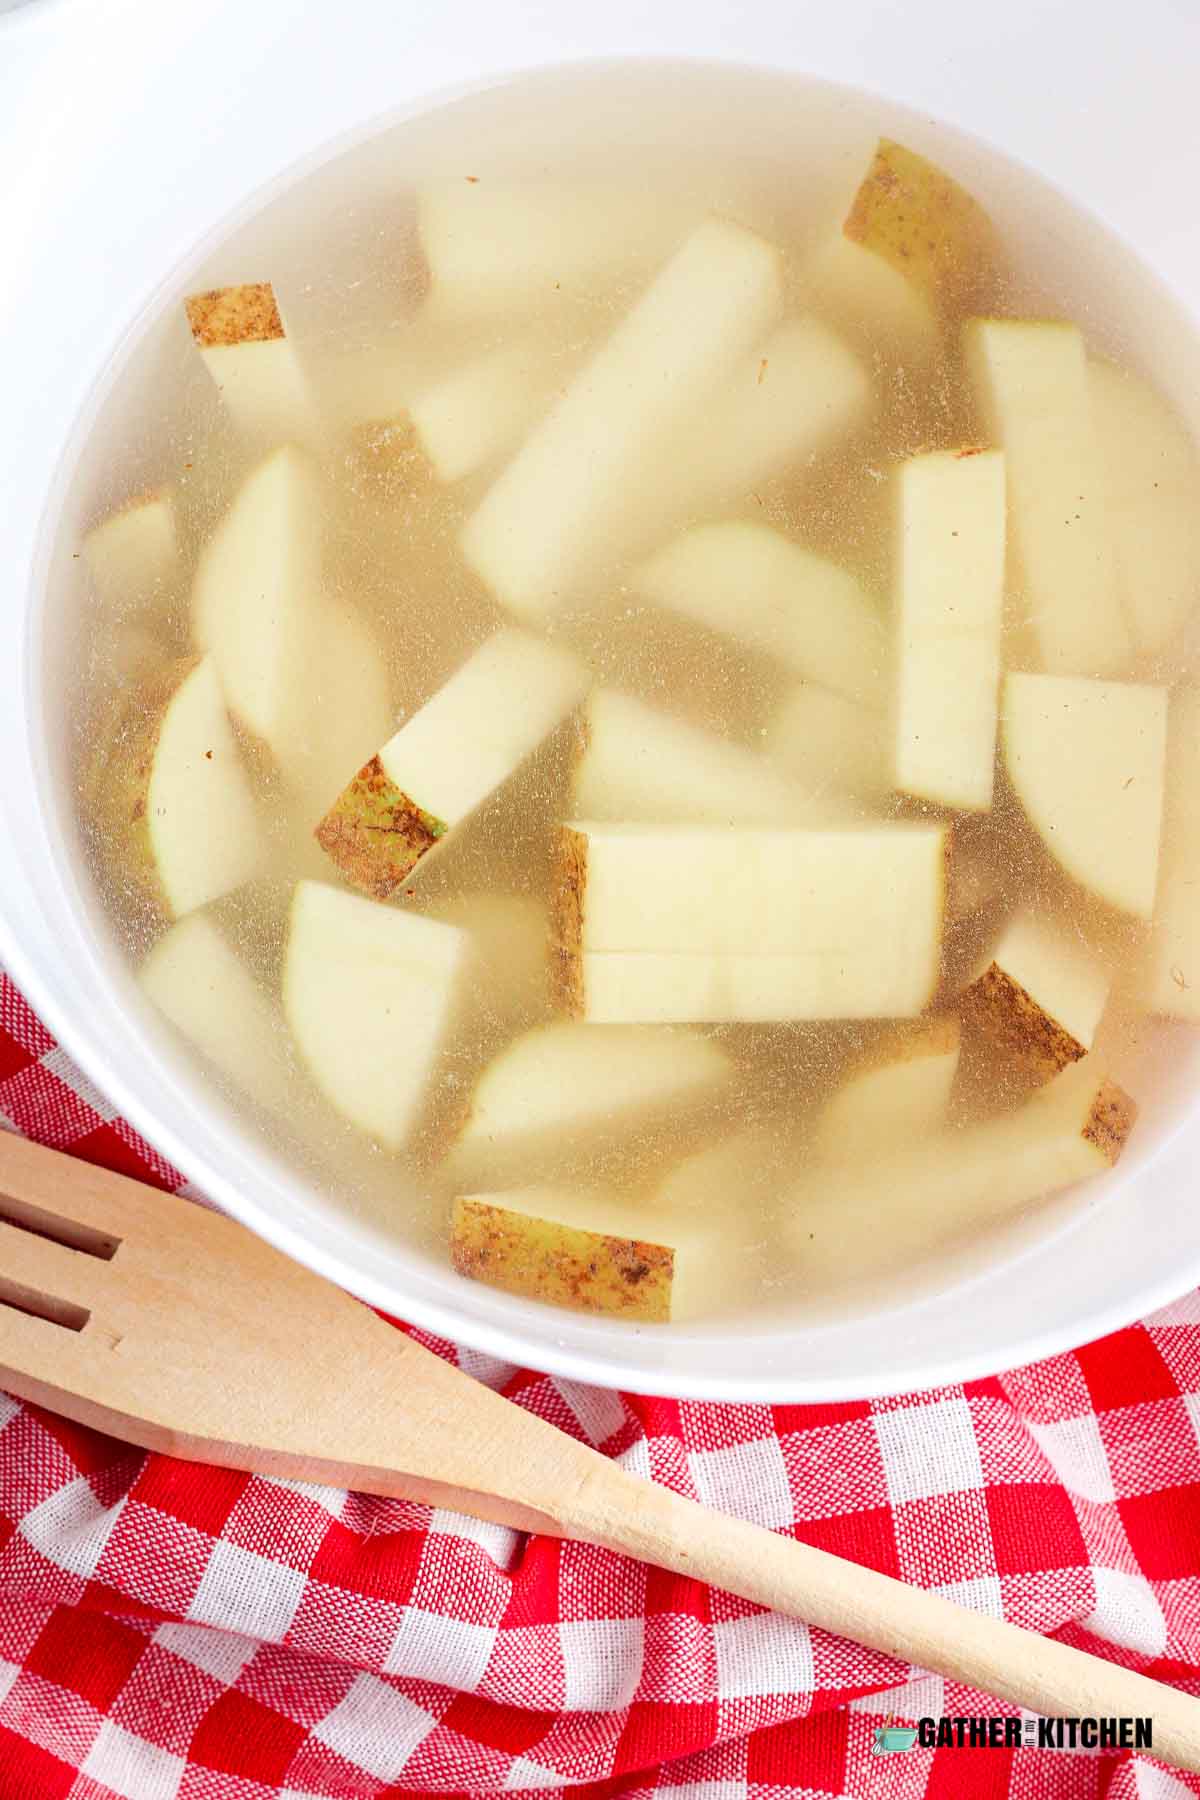 Cut up potatoes in bowl of water.